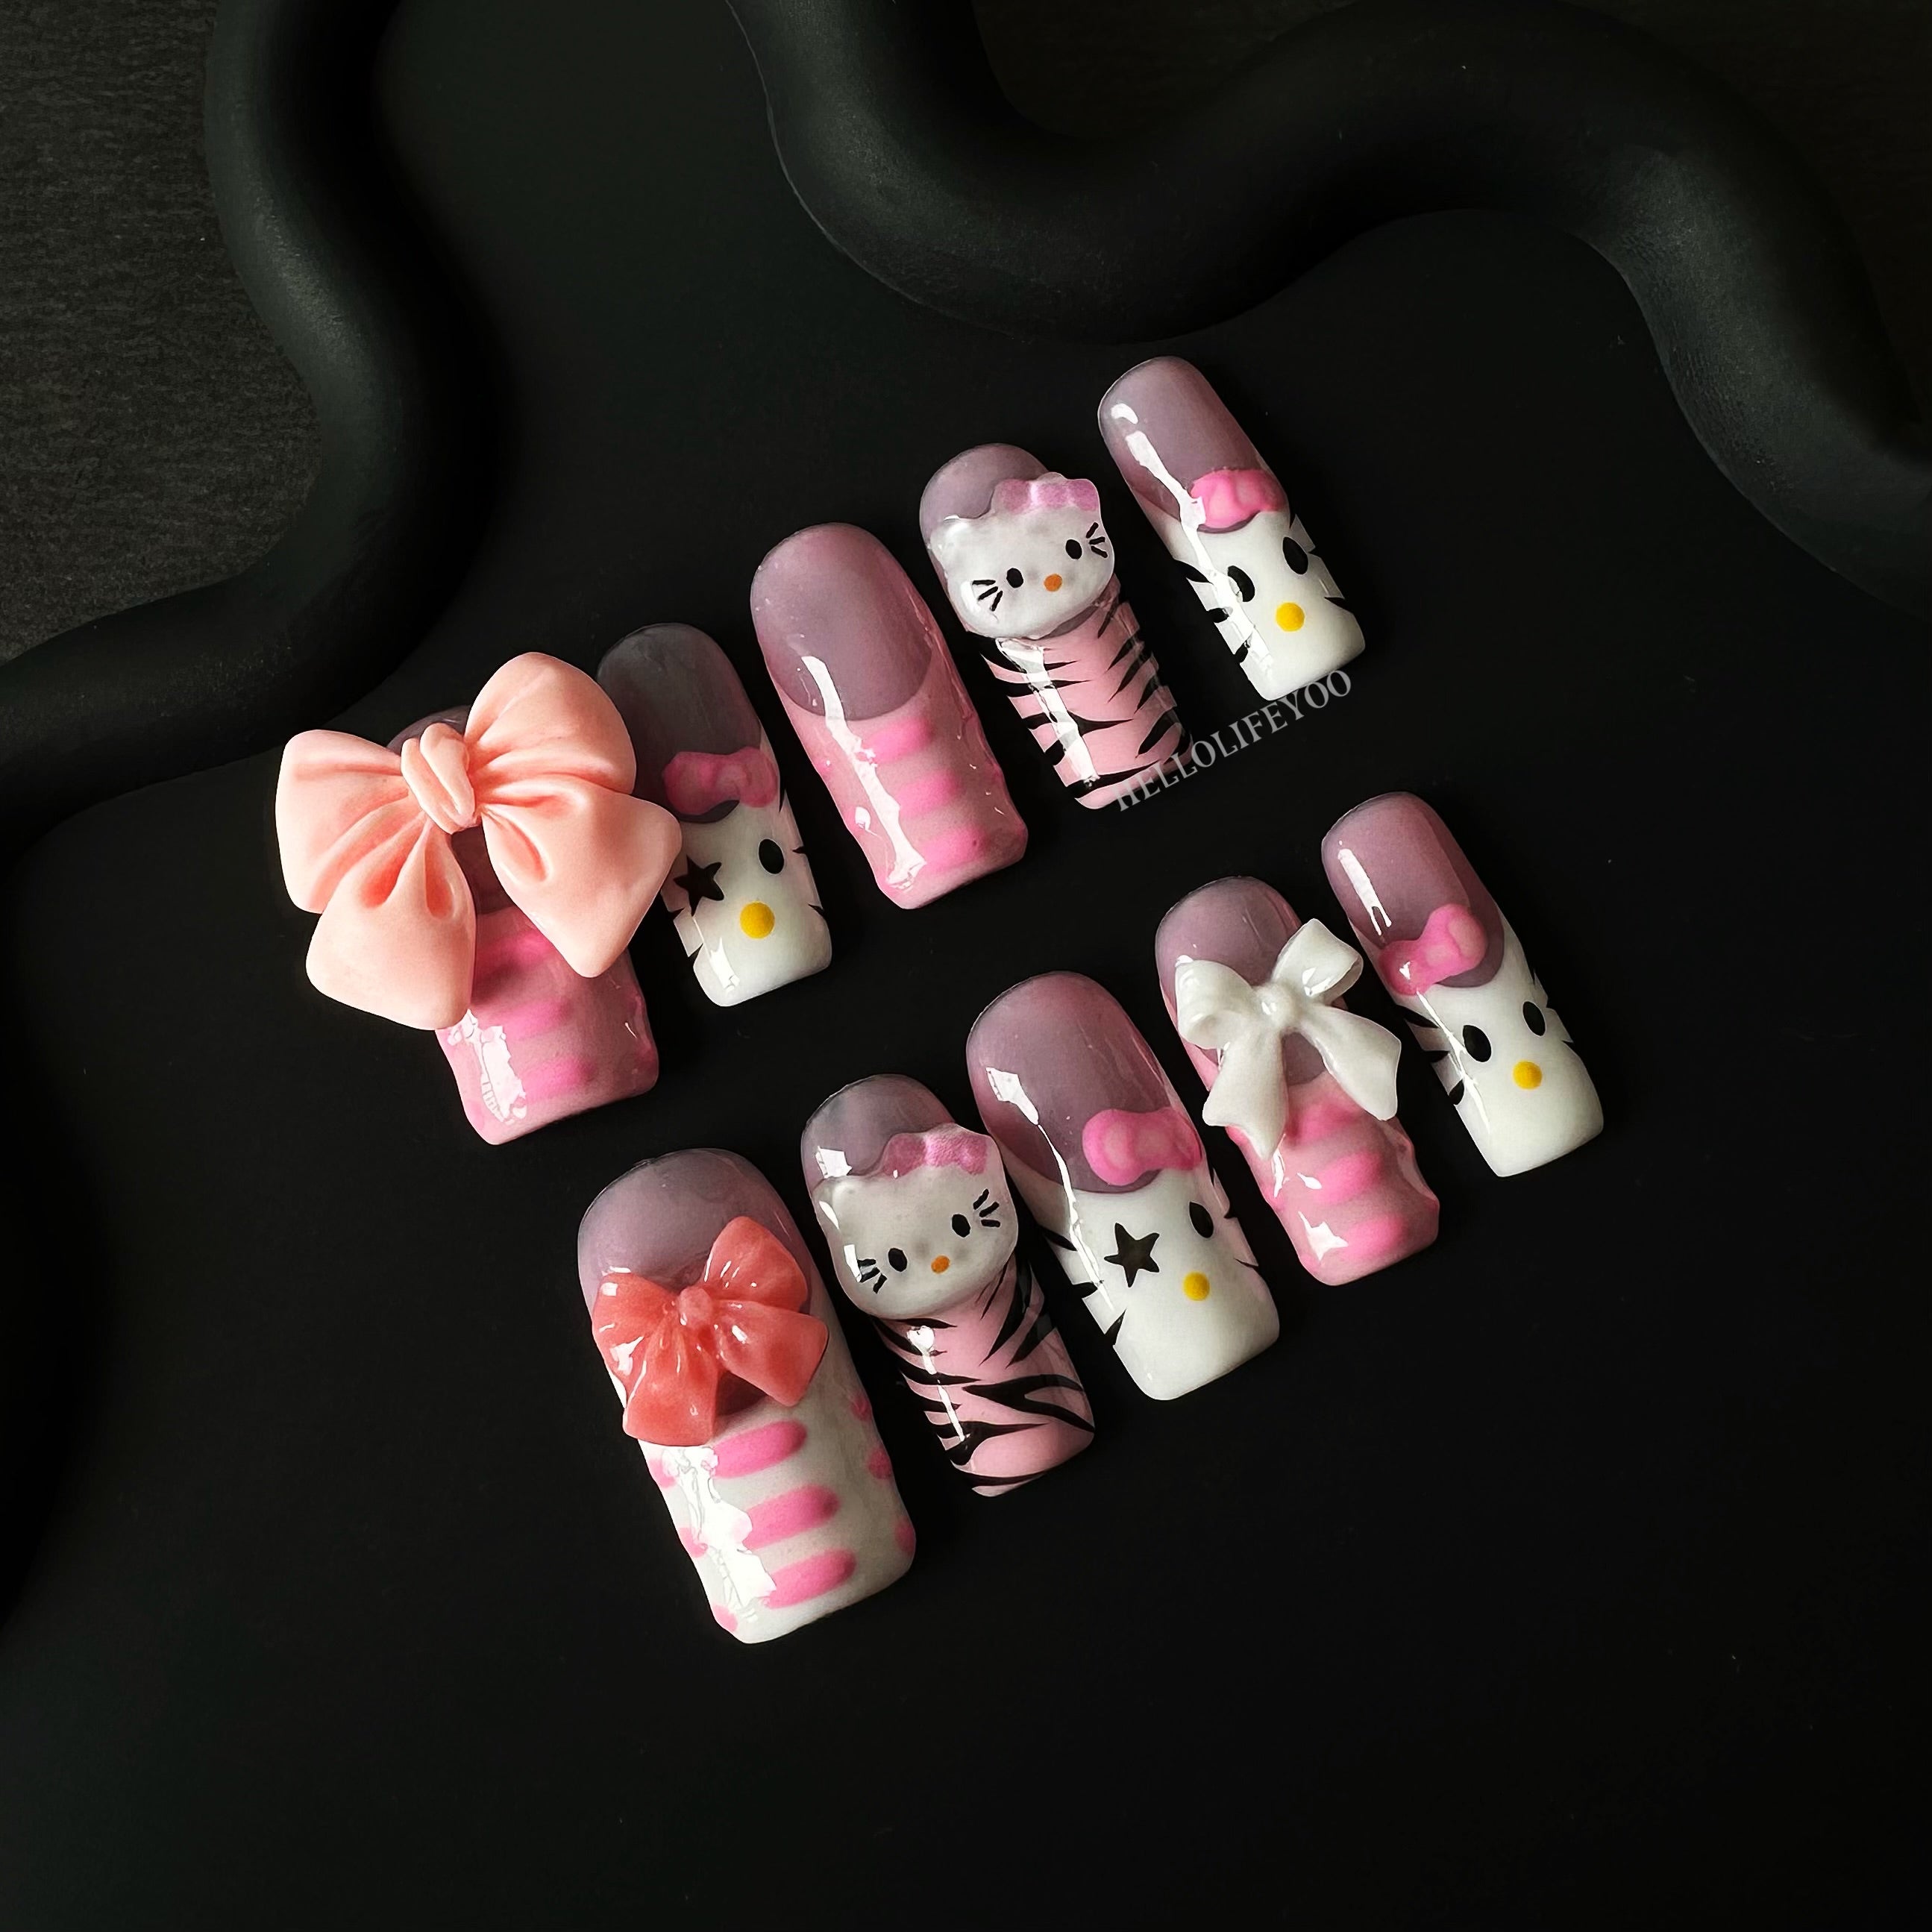 SANIO Y2K HELLO KITTY-TEN PIECES OF HANDCRAFTED PRESS ON NAIL